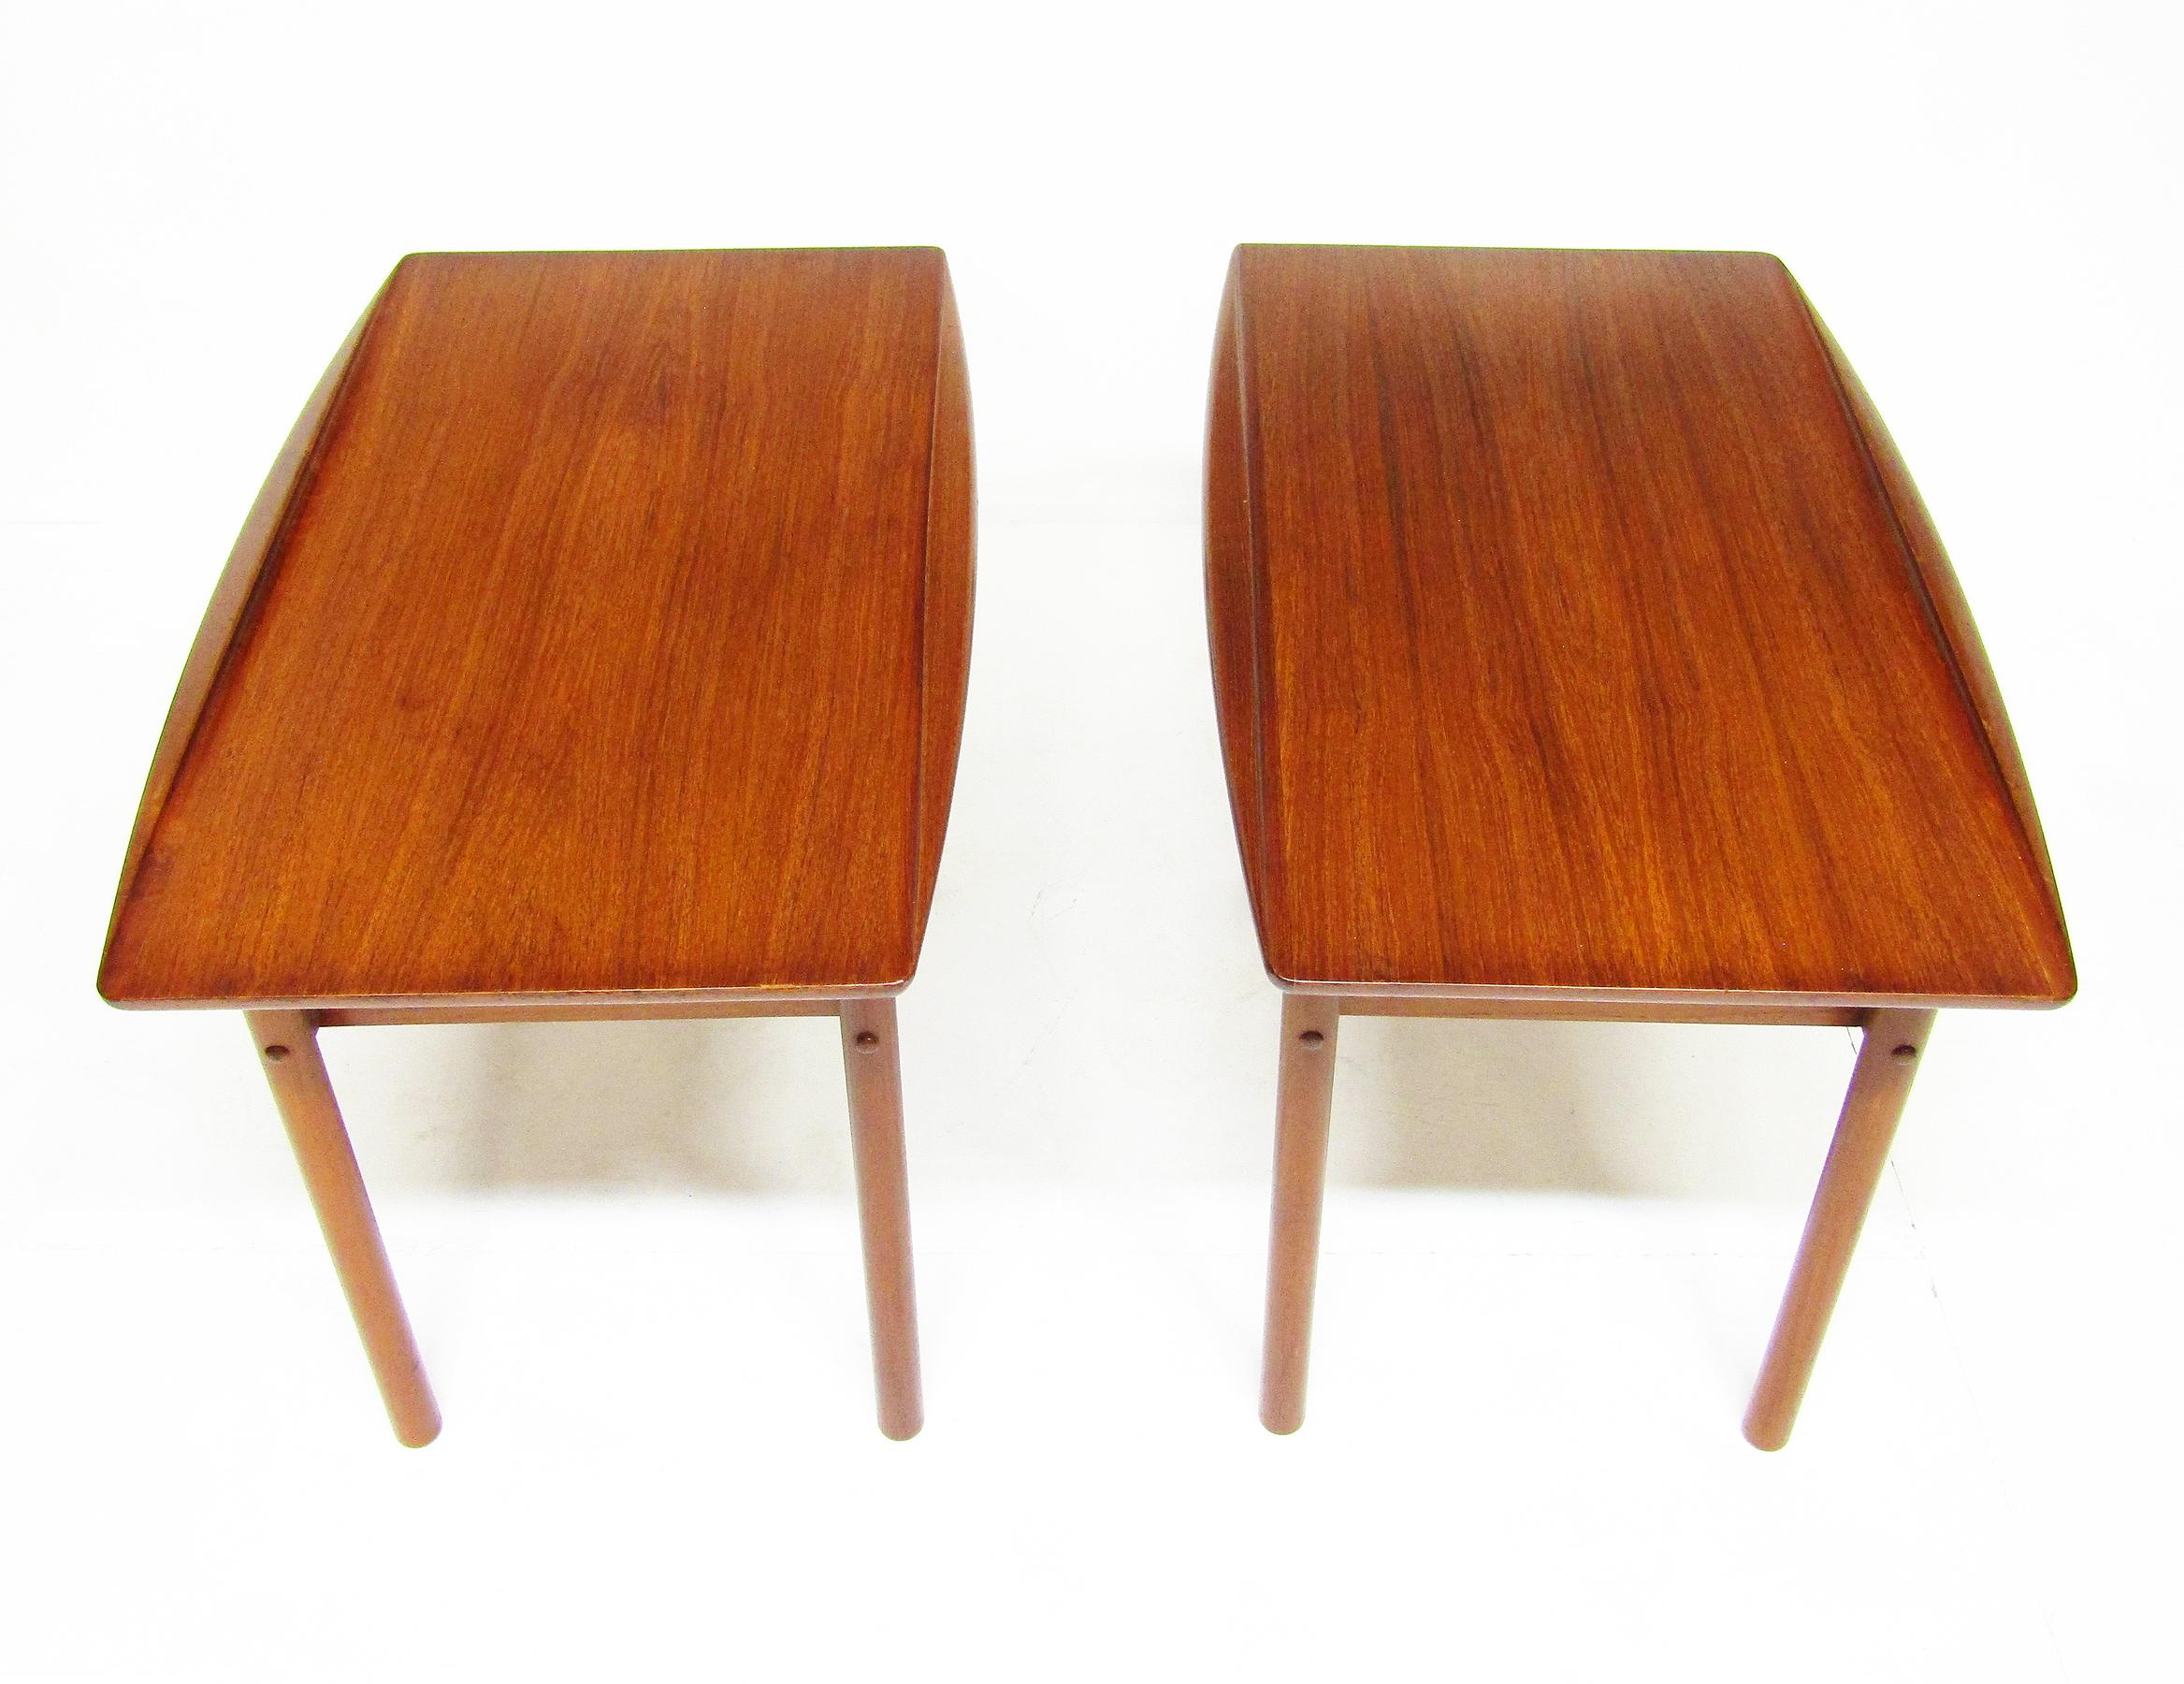 A pair of beautifully sculpted side tables in teak by Grete Jalk for P. Jeppesen.

These 1960s surfboard-style tables feature gracefully curved edges and slatted shelf undertiers.

They are in excellent, refinished condition, retaining the warm,